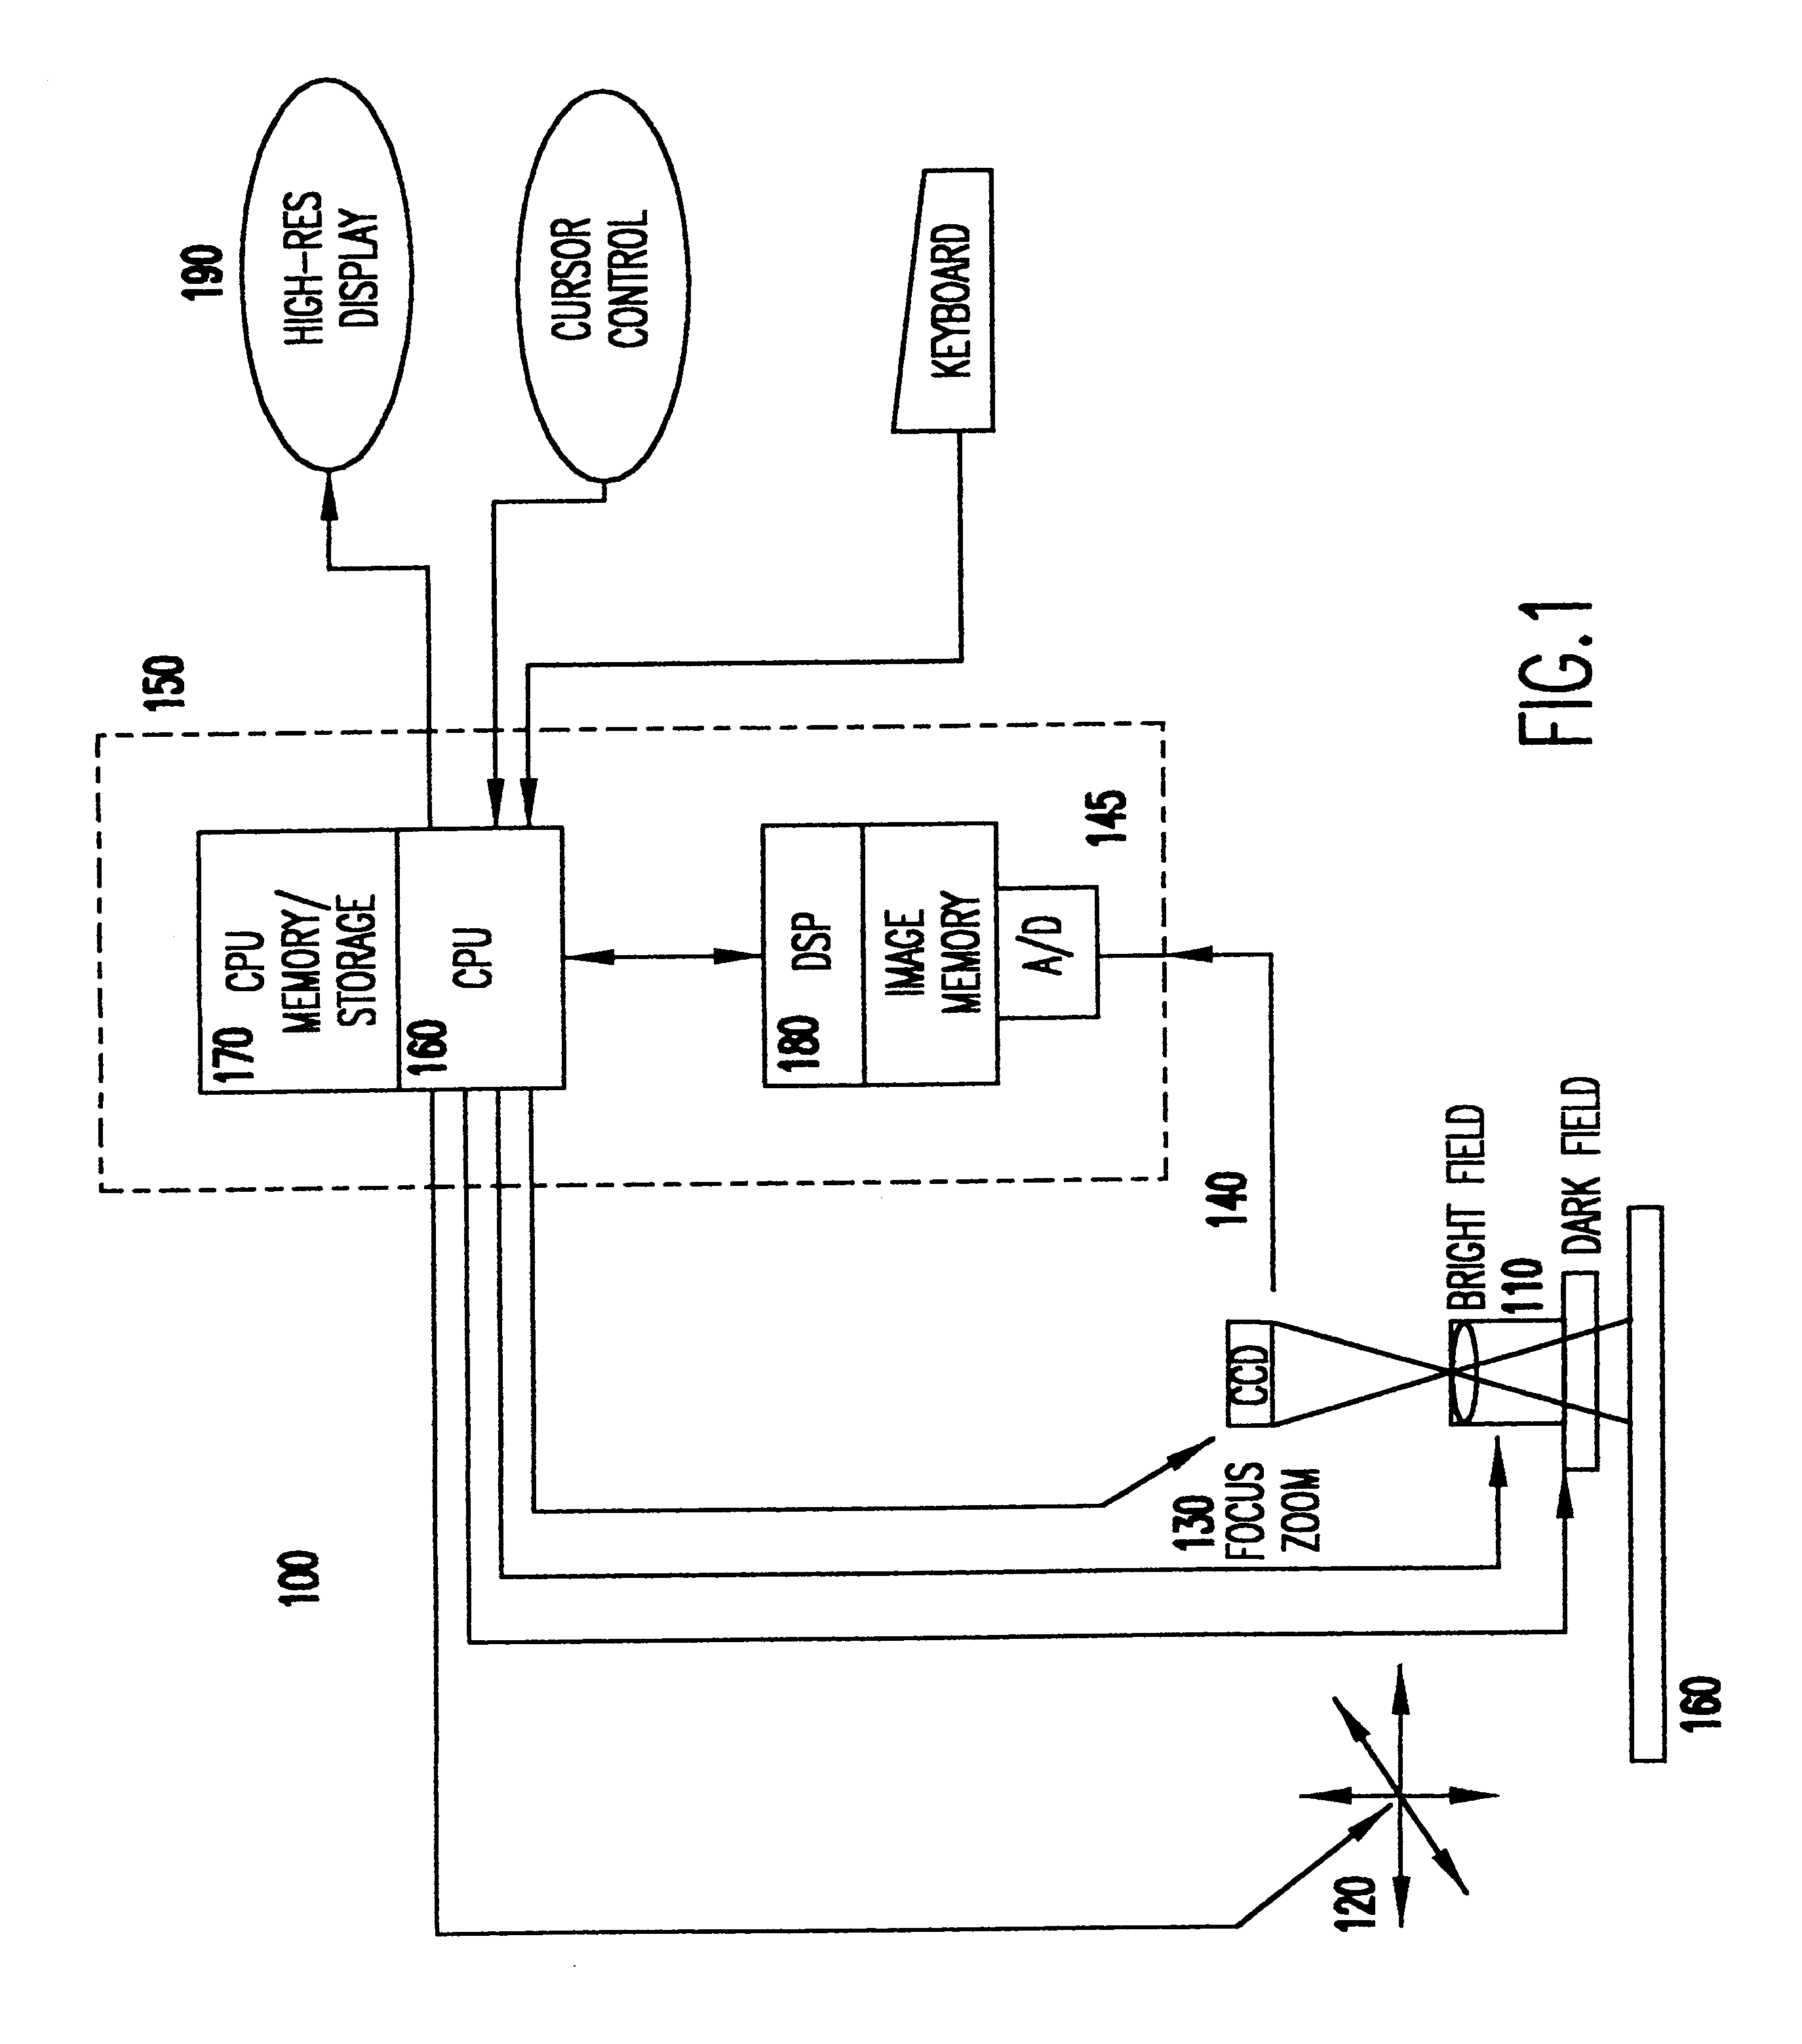 Automated inspection system for metallic surfaces